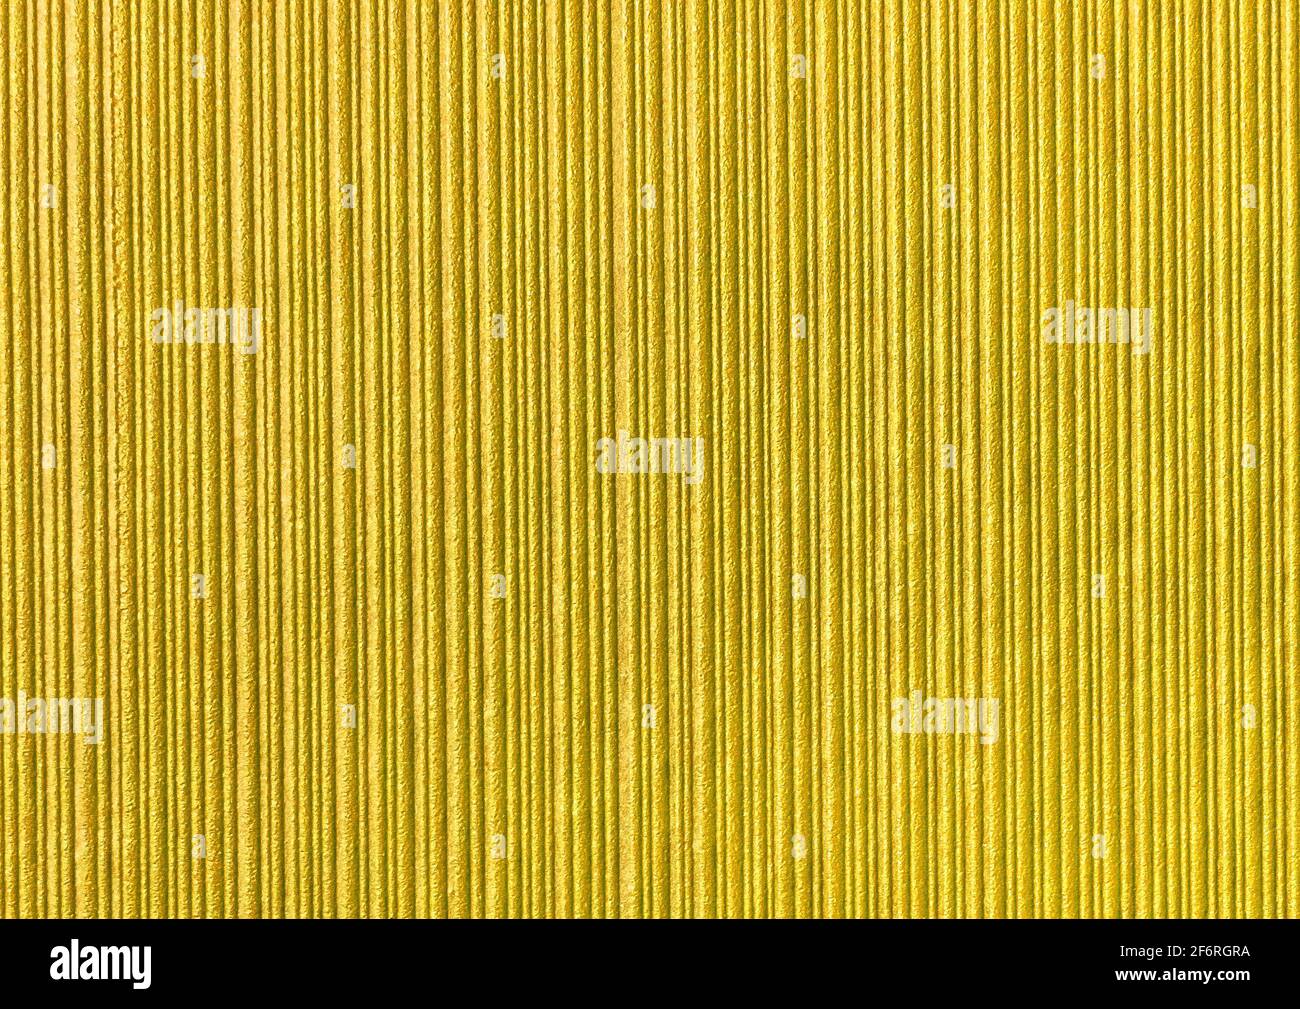 Yellow abstract striped pattern wallpaper background, gold paper texture with vertical lines. Stock Photo